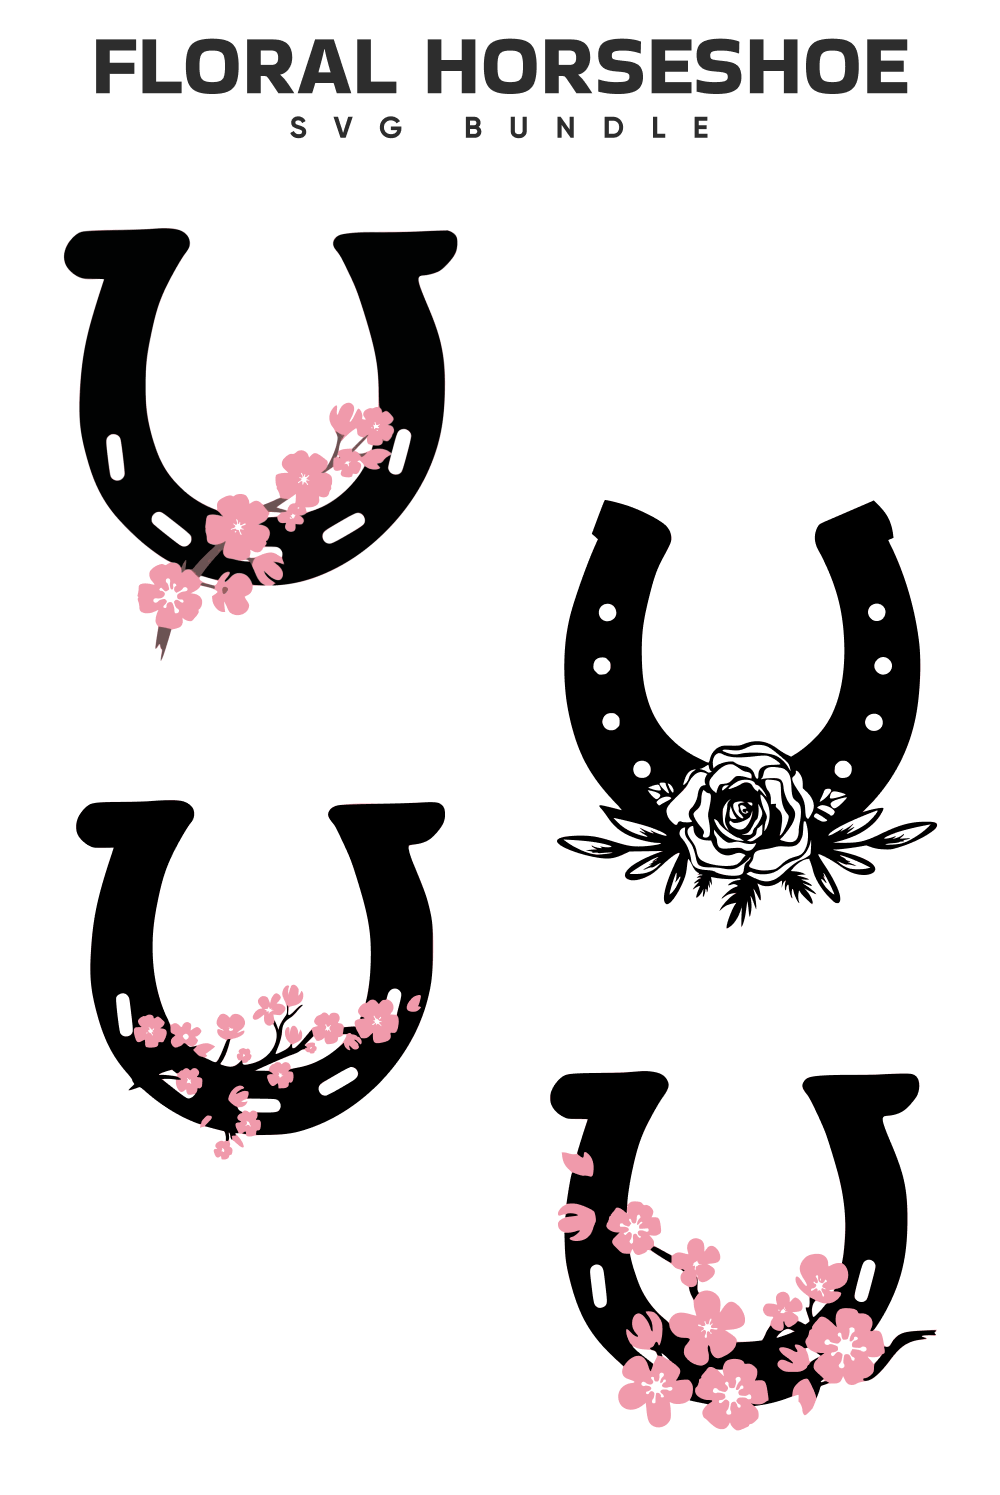 Horse shoe with pink flowers on it.